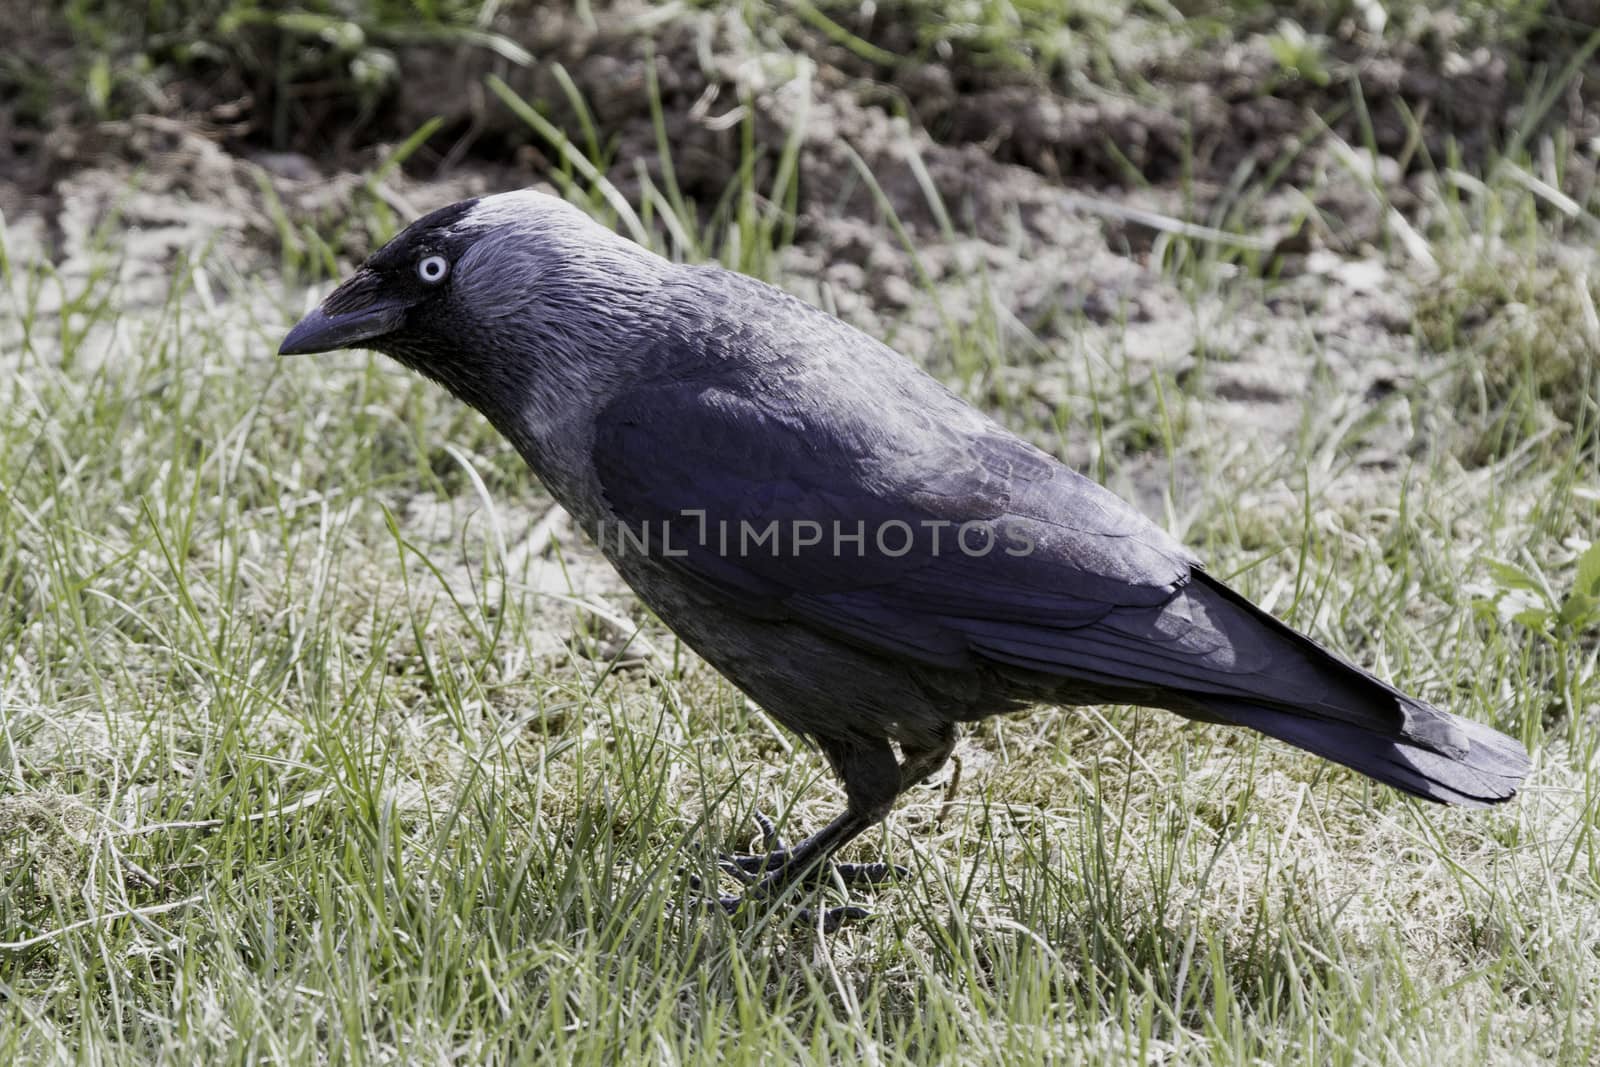 Jackdaw on a lawn by thomas_males